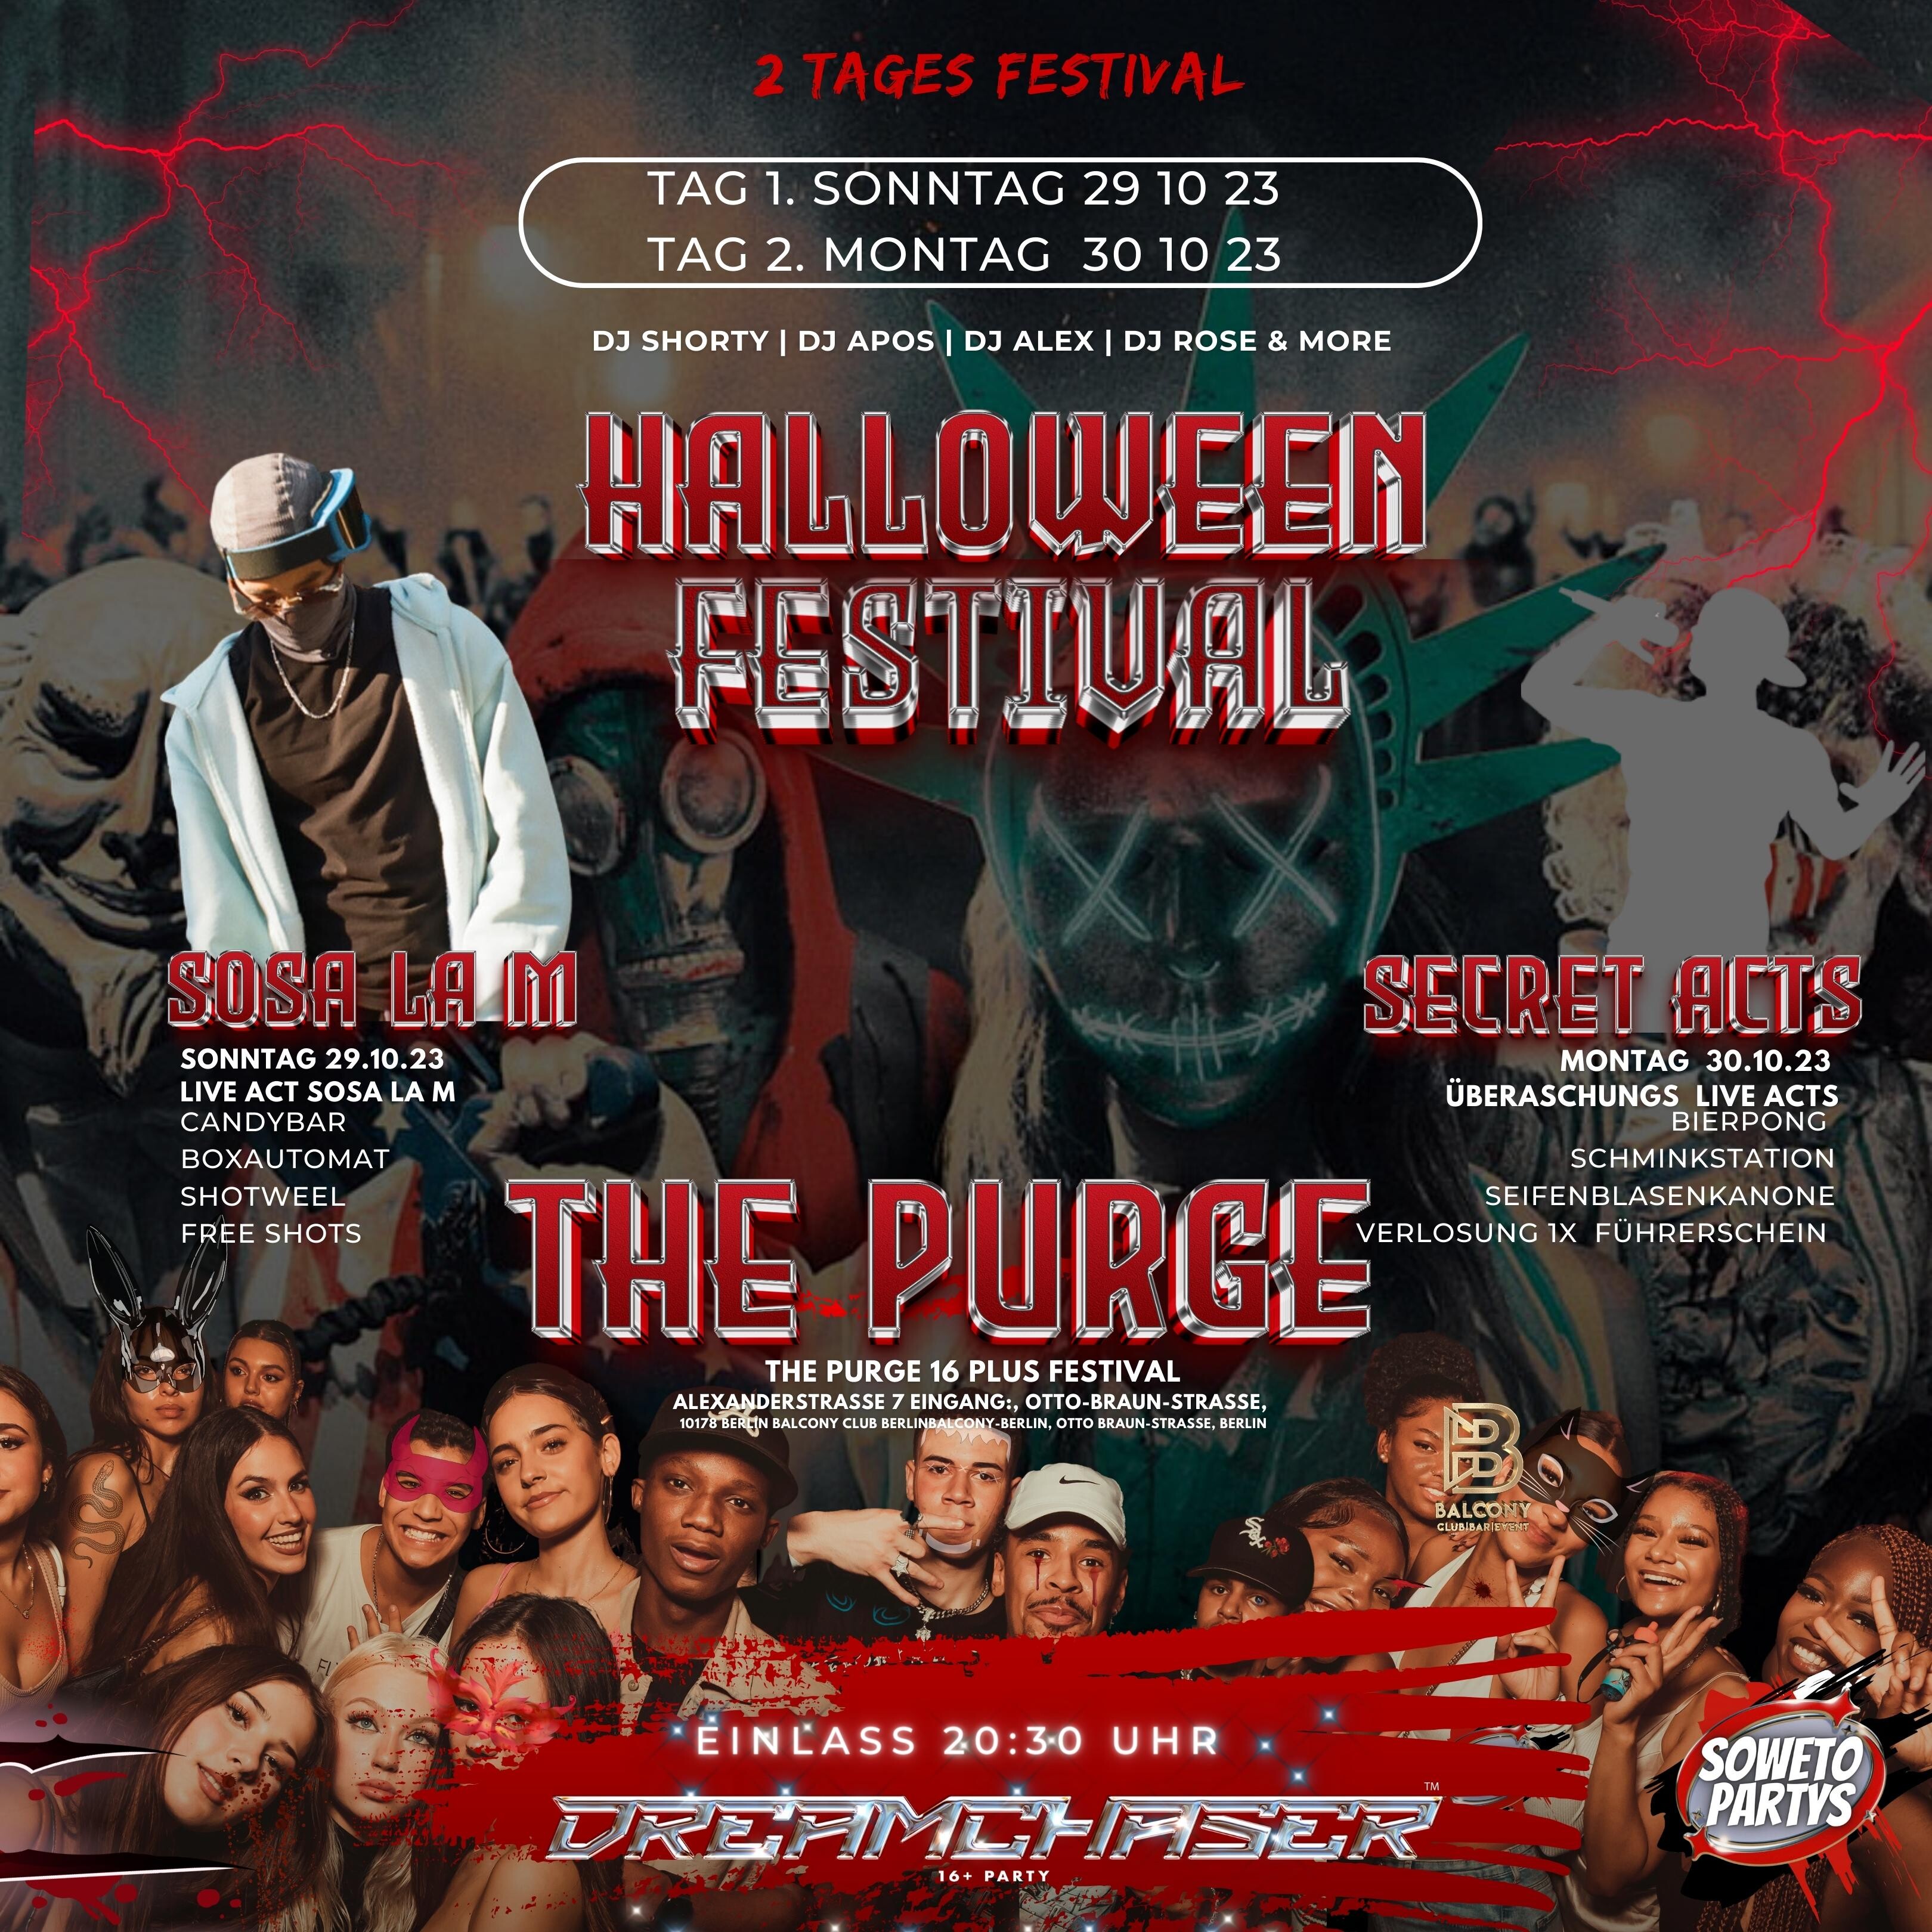 The Balcony Club Berlin The Largest 16+ Halloween Festival | The Purge edition 2 days 2 live acts